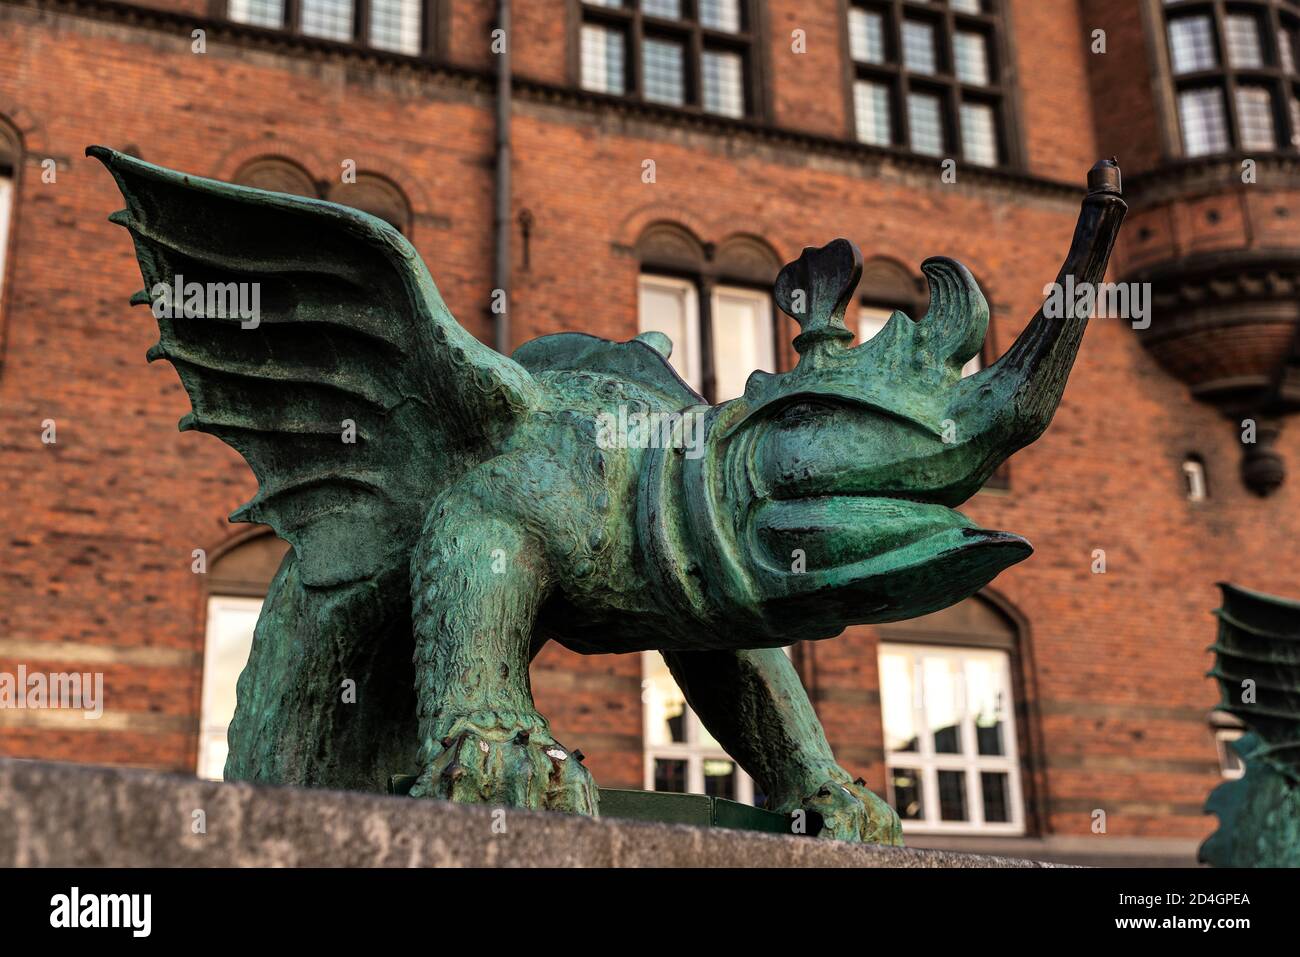 Statue of a gallifant or gallifante, imaginary animal half rooster half elephant, in the Copenhagen City Hall in City Hall Square or Rådhuspladsen in Stock Photo